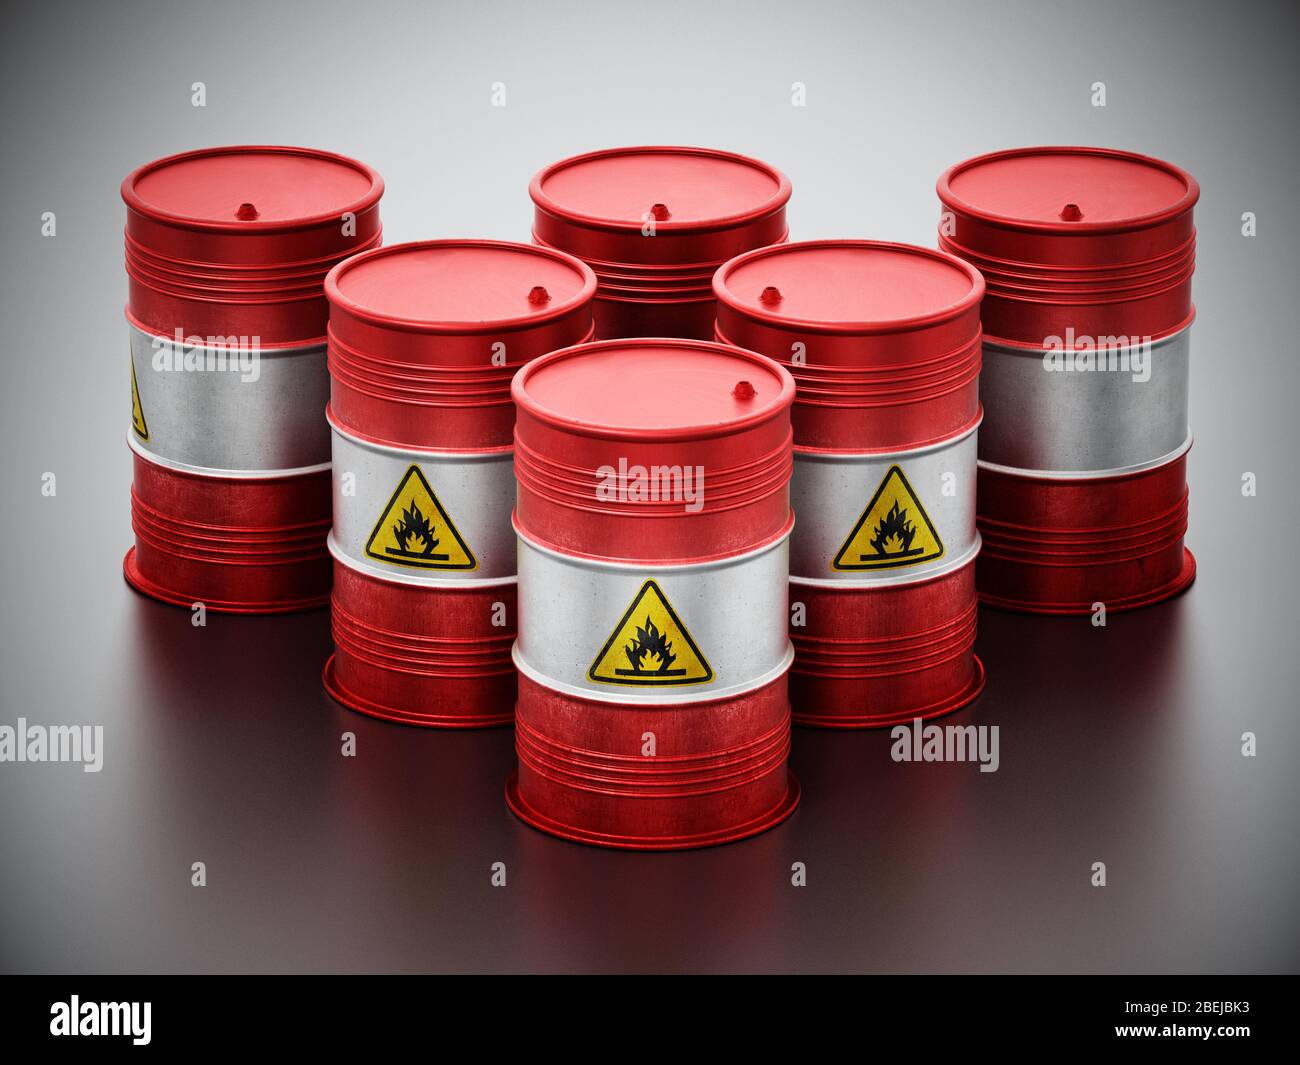 Old barrels with inflammable symbol. 3D illustration. Stock Photo